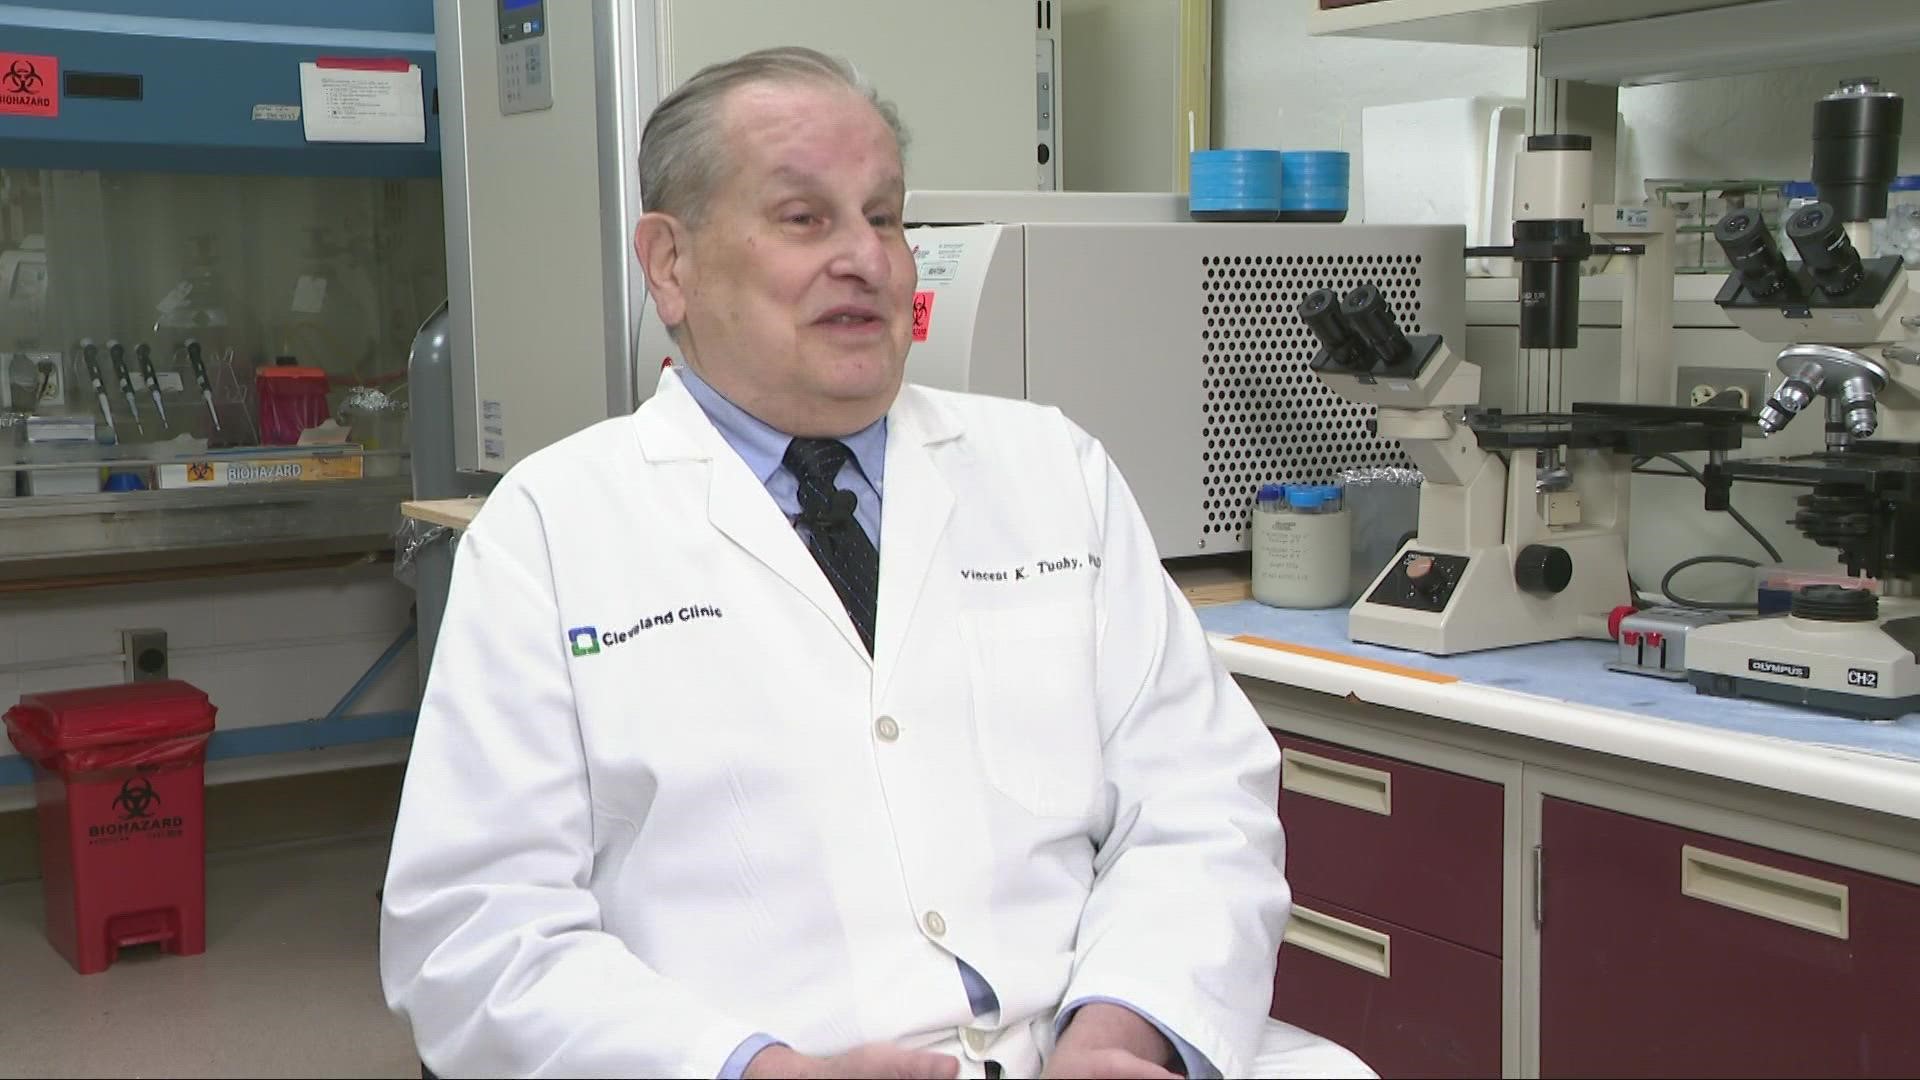 "What we are proposing here in my program at the Cleveland Clinic is that we develop a 21st century vaccine program that prevents diseases."